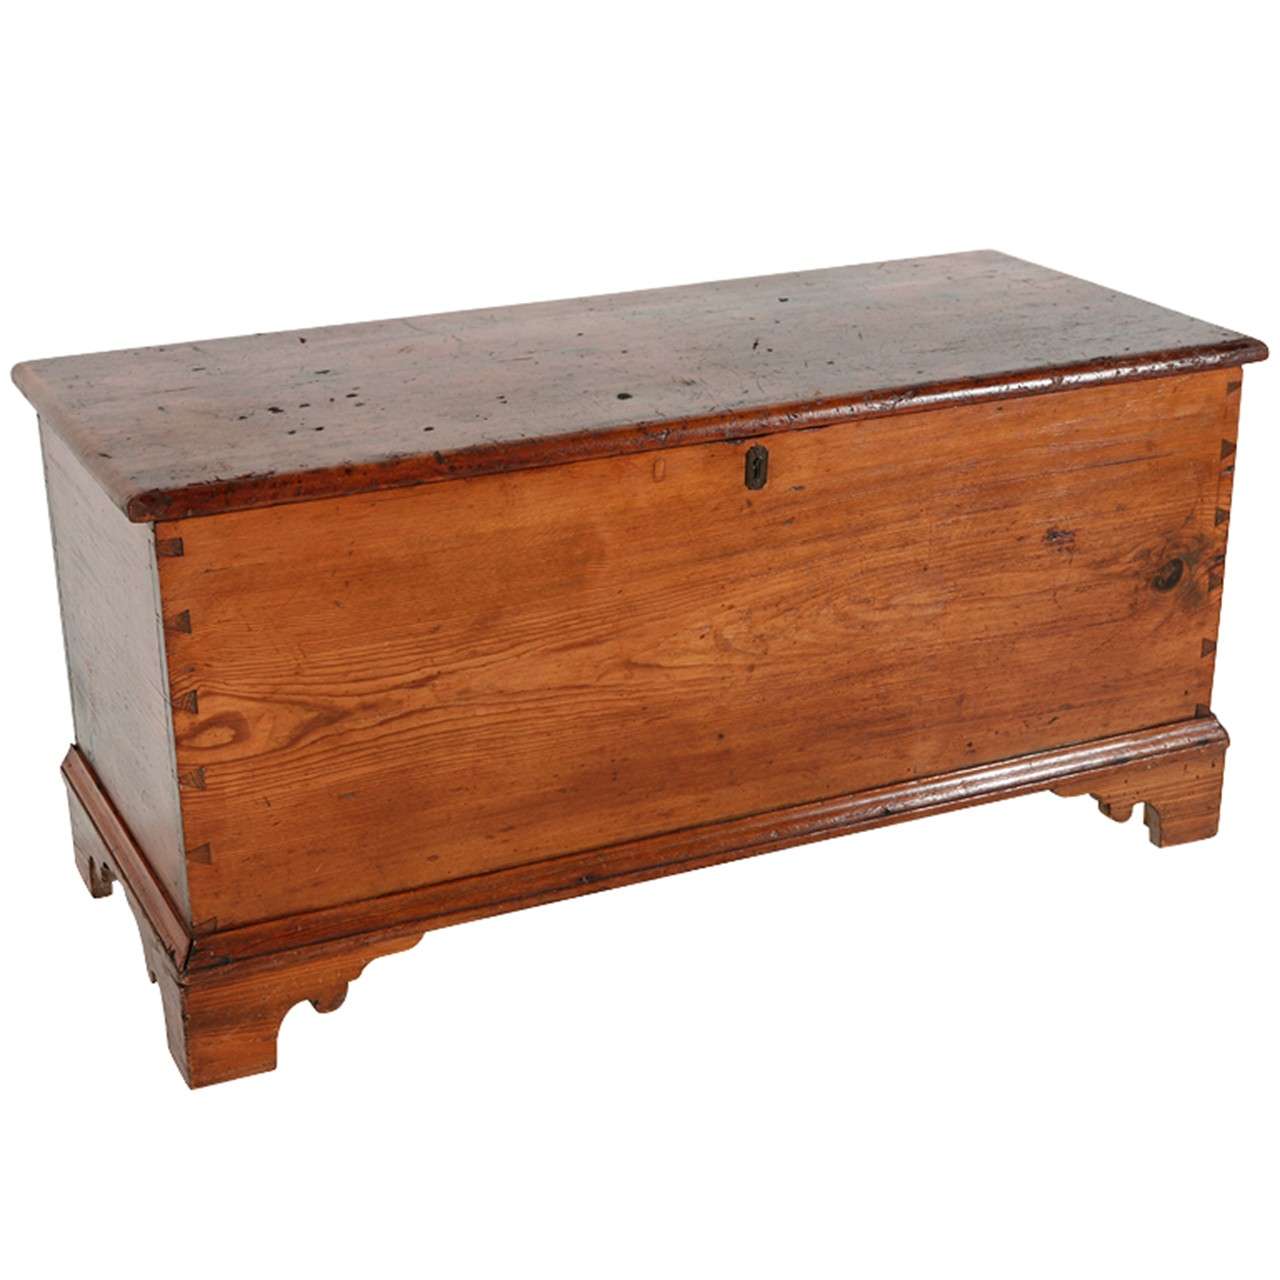 Early 20th Century Antique Cedar Blanket Chest at 1stdibs